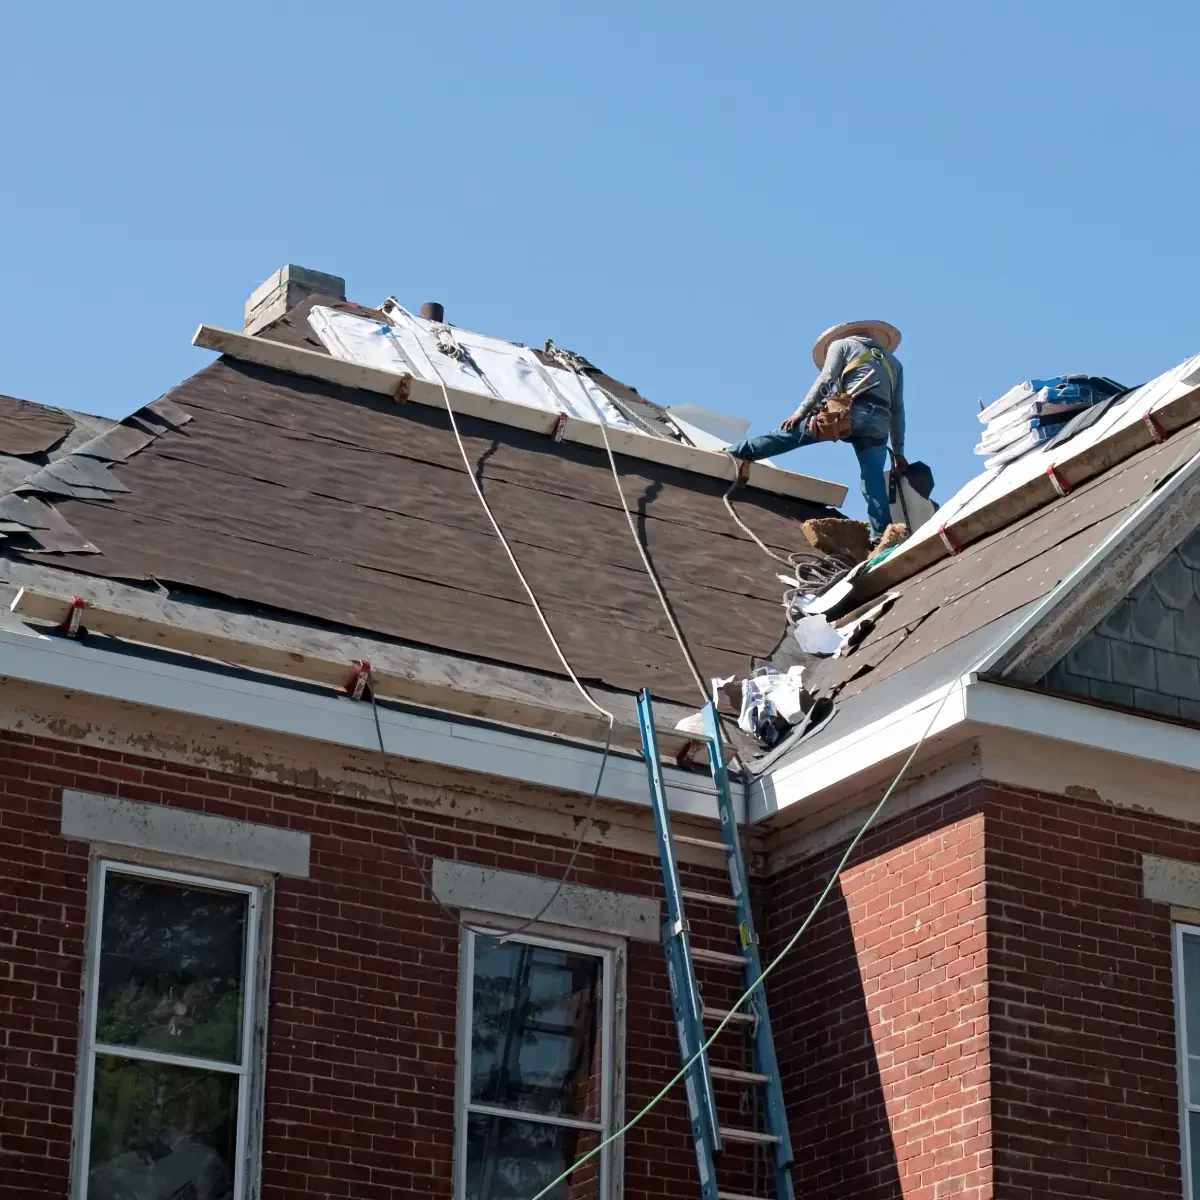 provo-utah-roof-replacement-contractor (2)